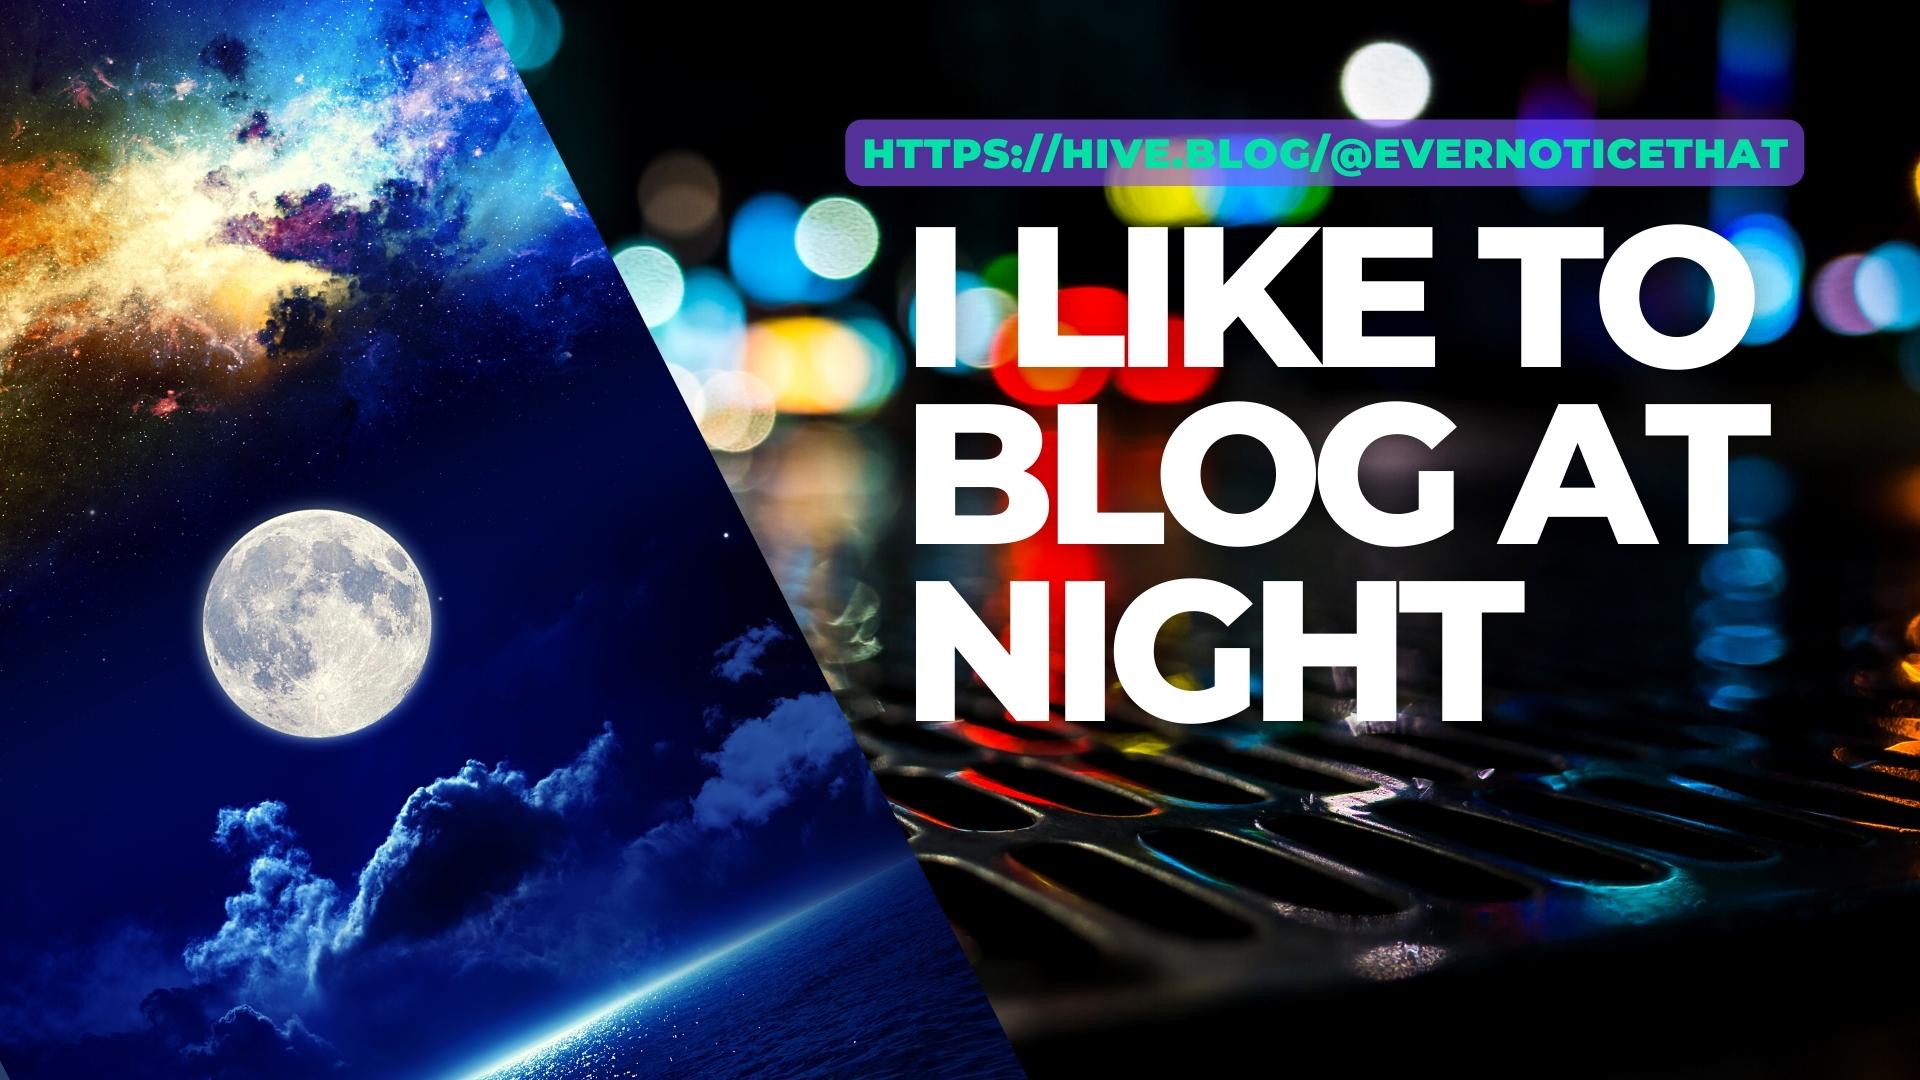 blogging-blog-content-creator-hive-germany-night @EverNoticeThat.jpg